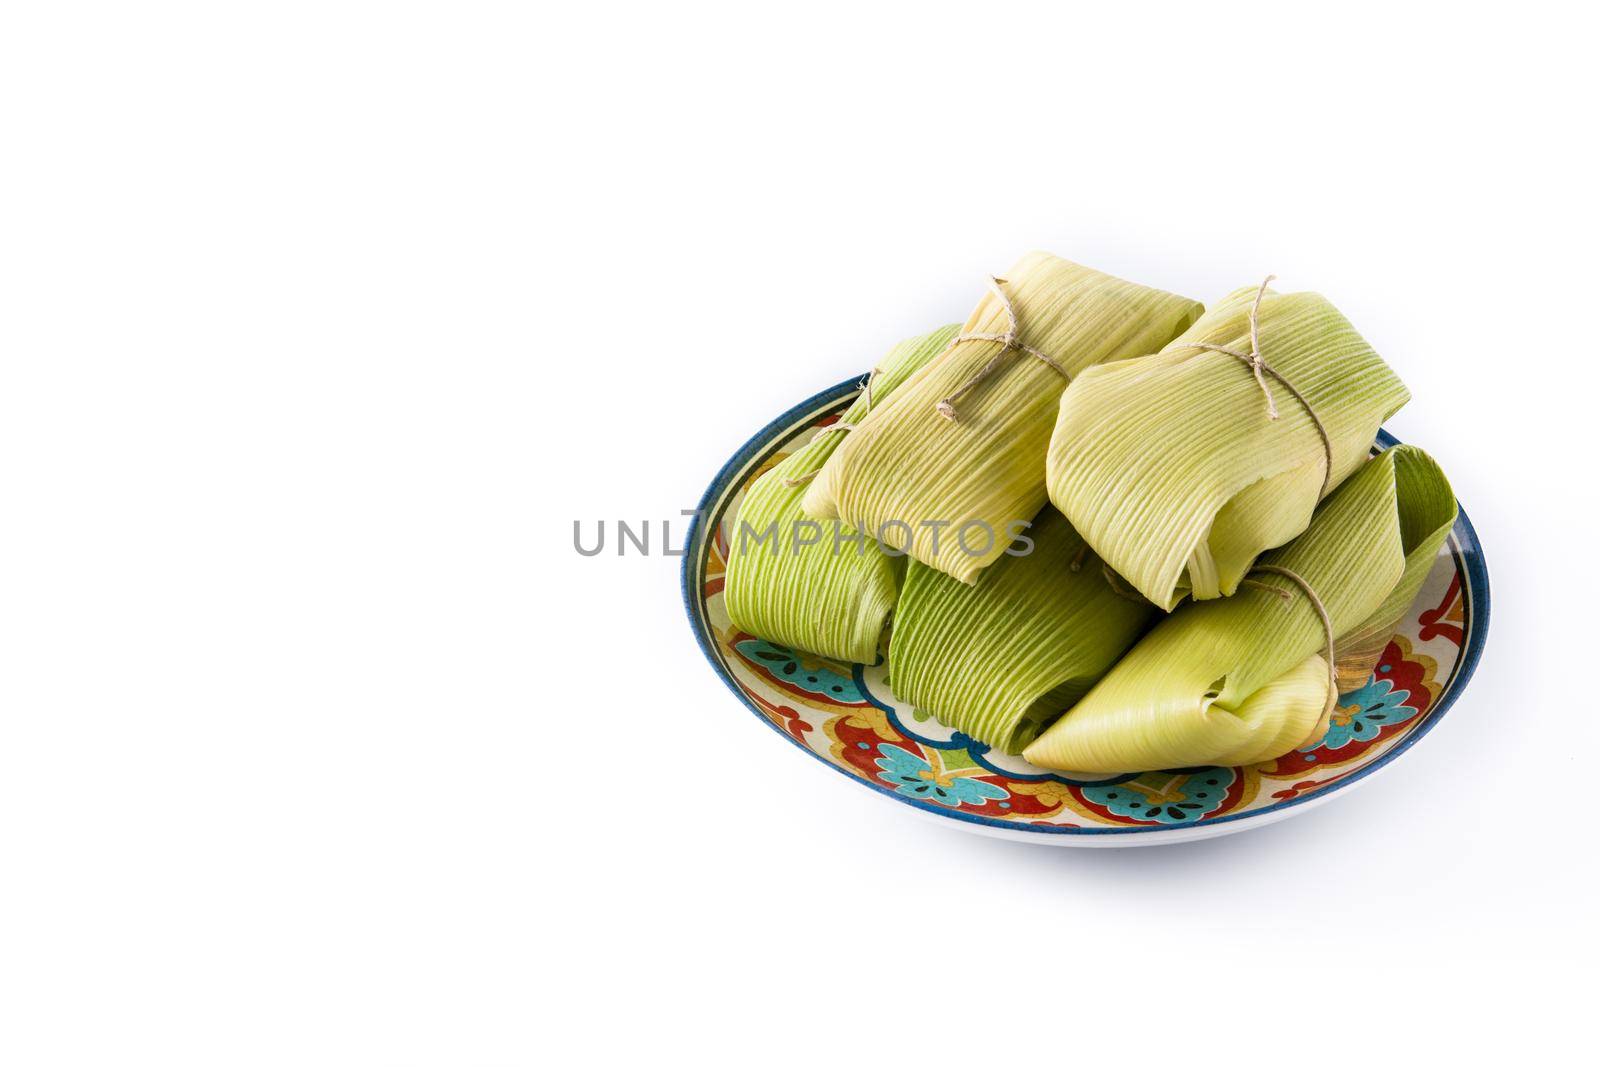 Mexican corn and chicken tamales isolated on white background